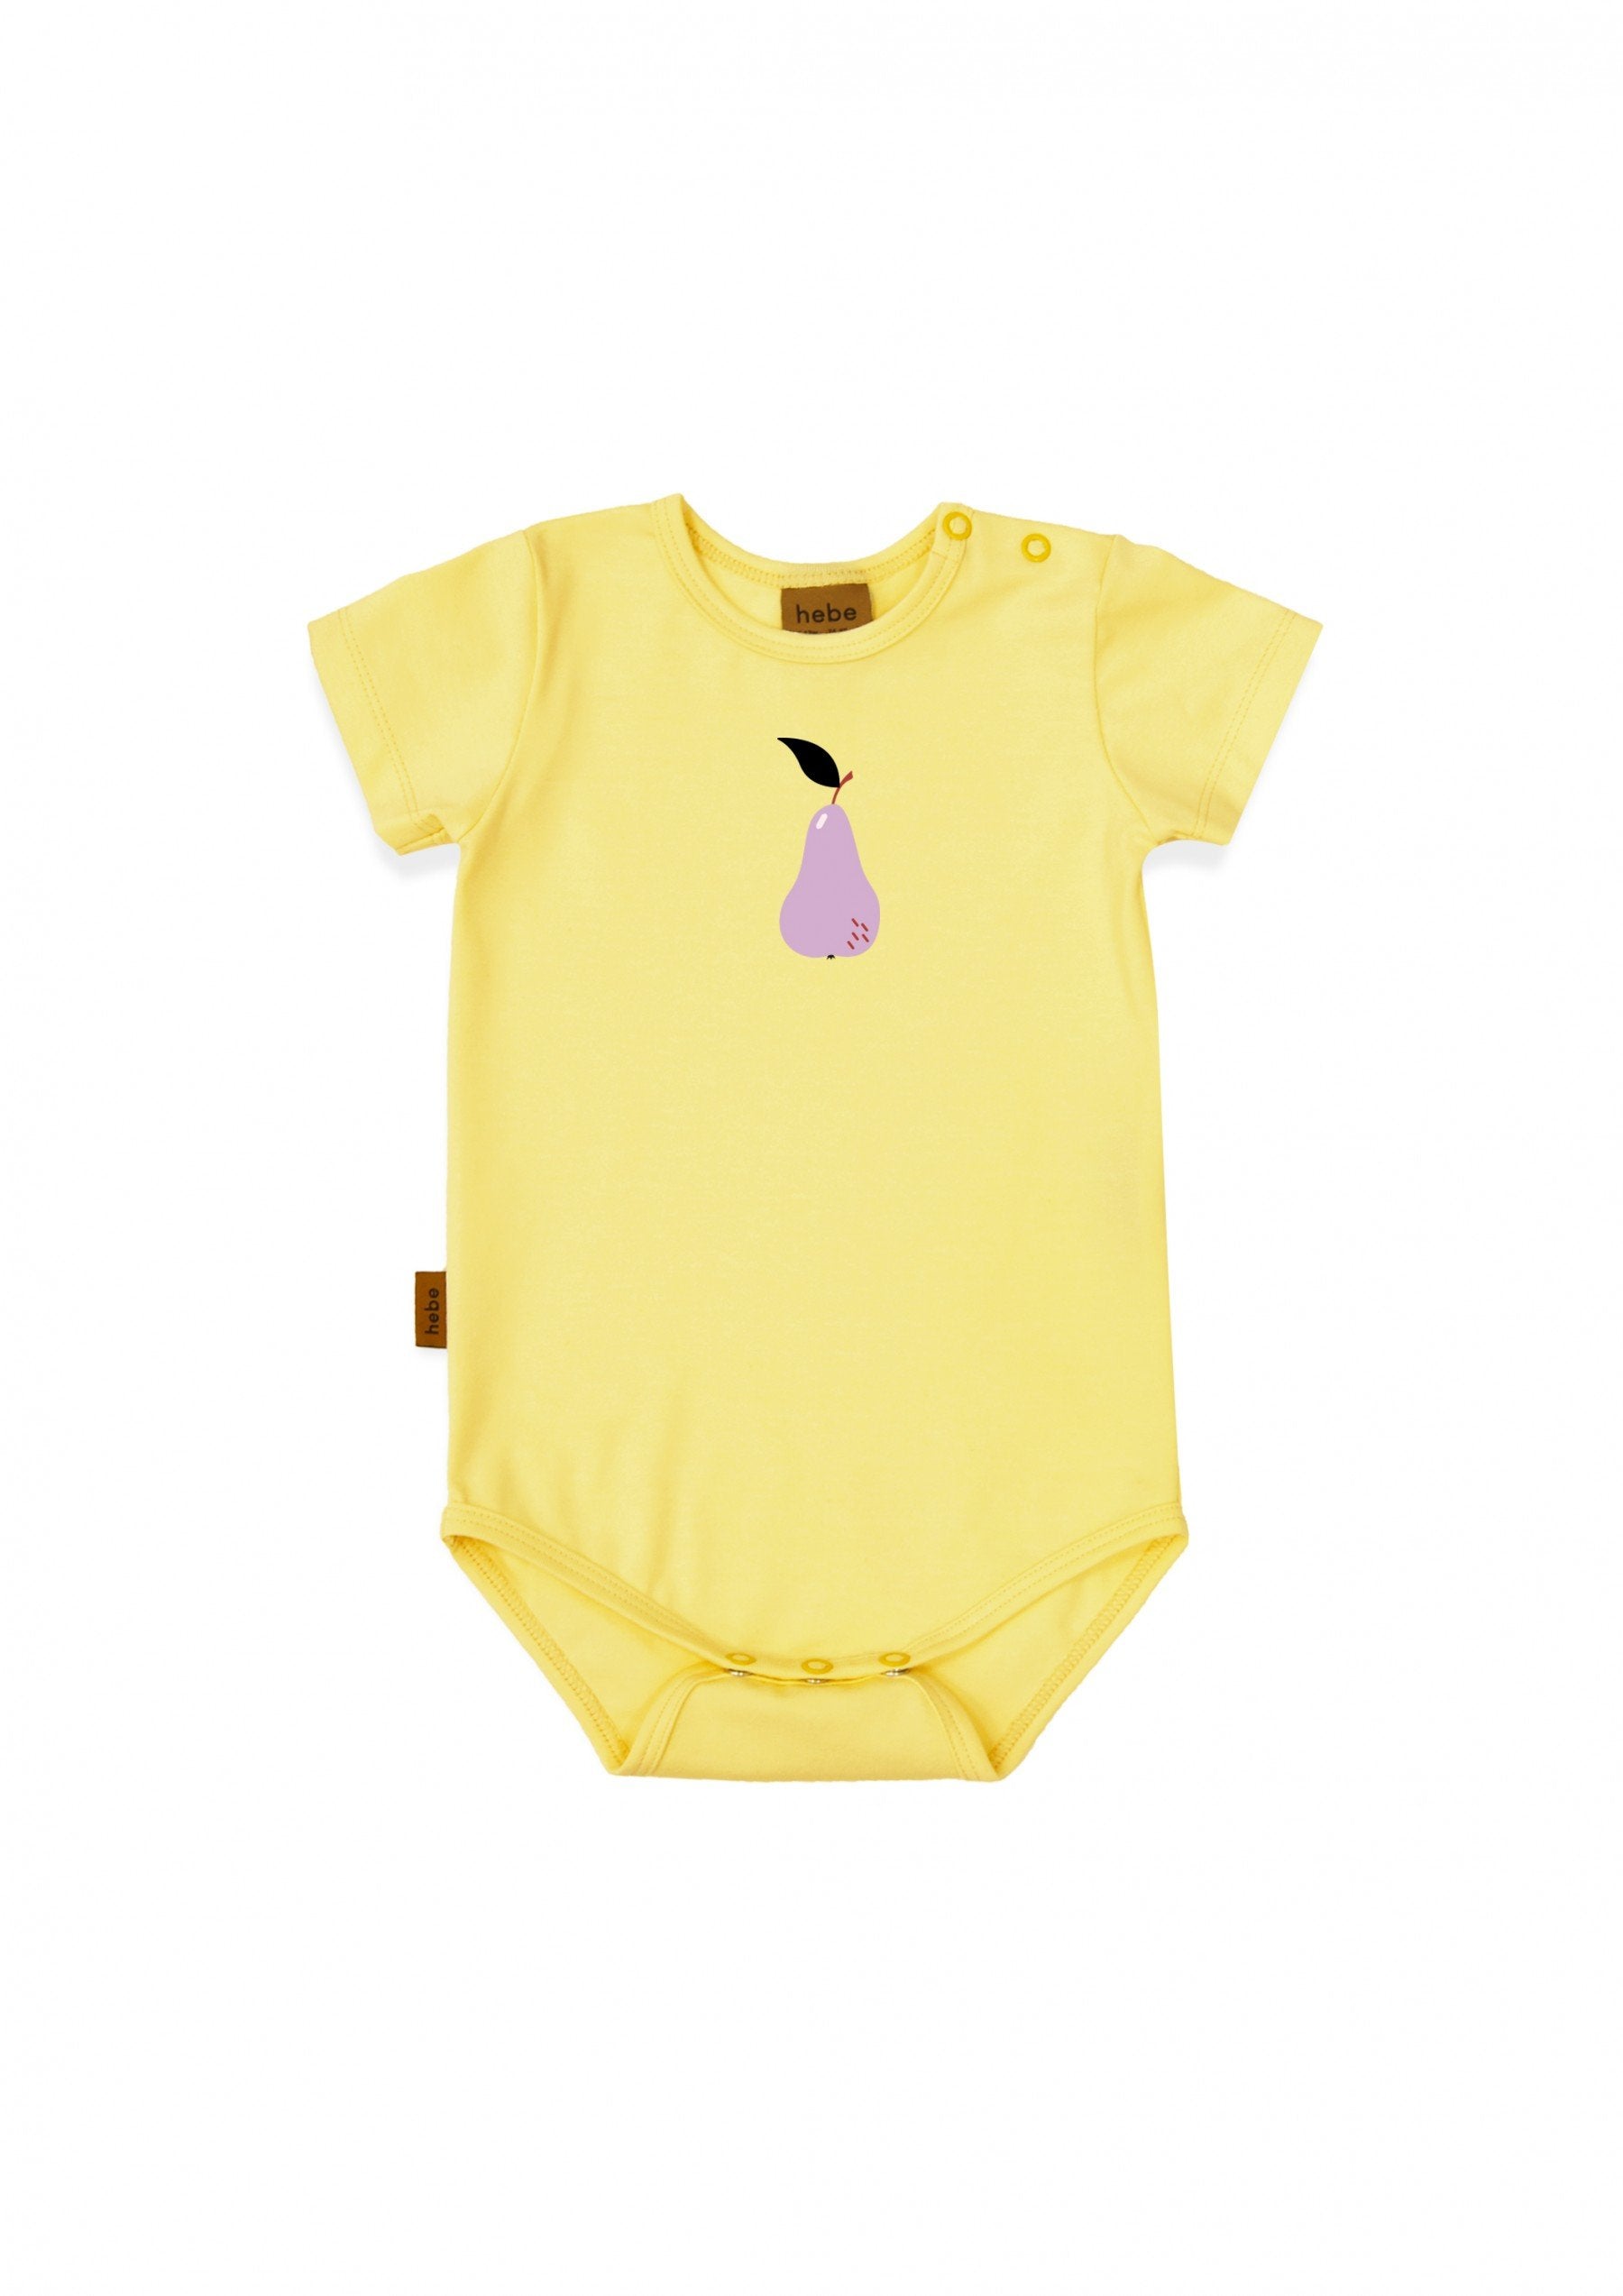 Hebe Body - Yellow with Pear